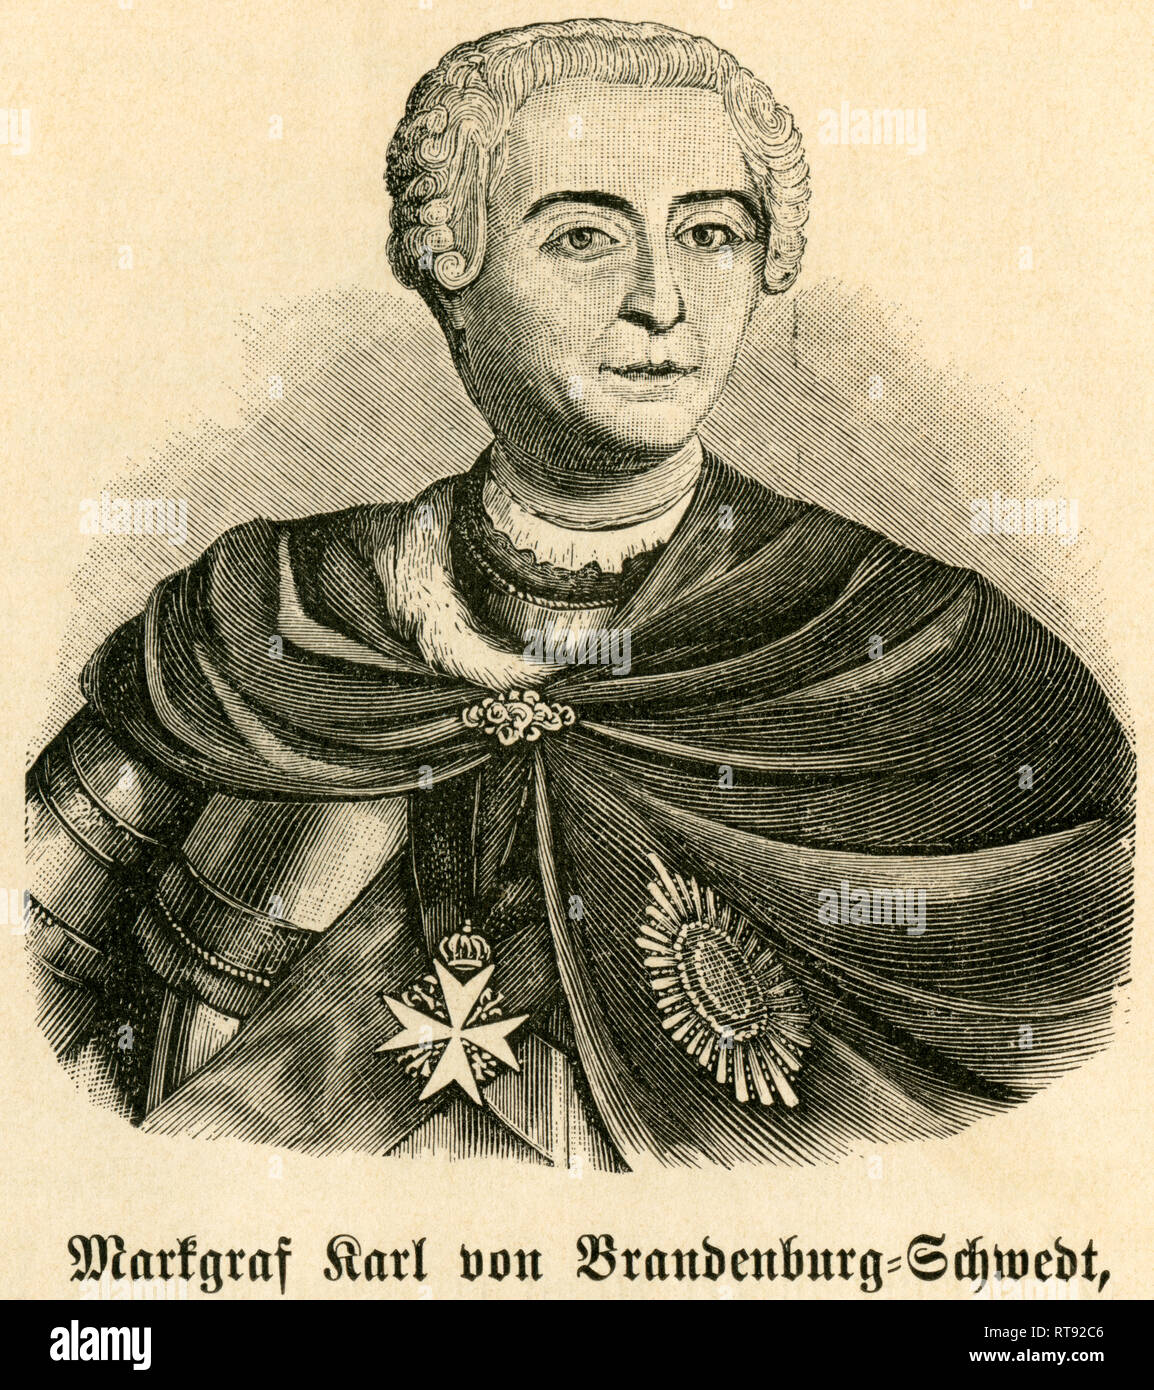 Germany, Berlin, Charles Frederick Albert, Margrave of Brandenburg-Schwedt, Prussian military officer, general, portrait from: 'Deutschlands Heerführer' (German military leader), 1640-1894, portrayed by Sprößer, publishing house Ferdinand Hirt and son, Leipzig, 1895., Additional-Rights-Clearance-Info-Not-Available Stock Photo